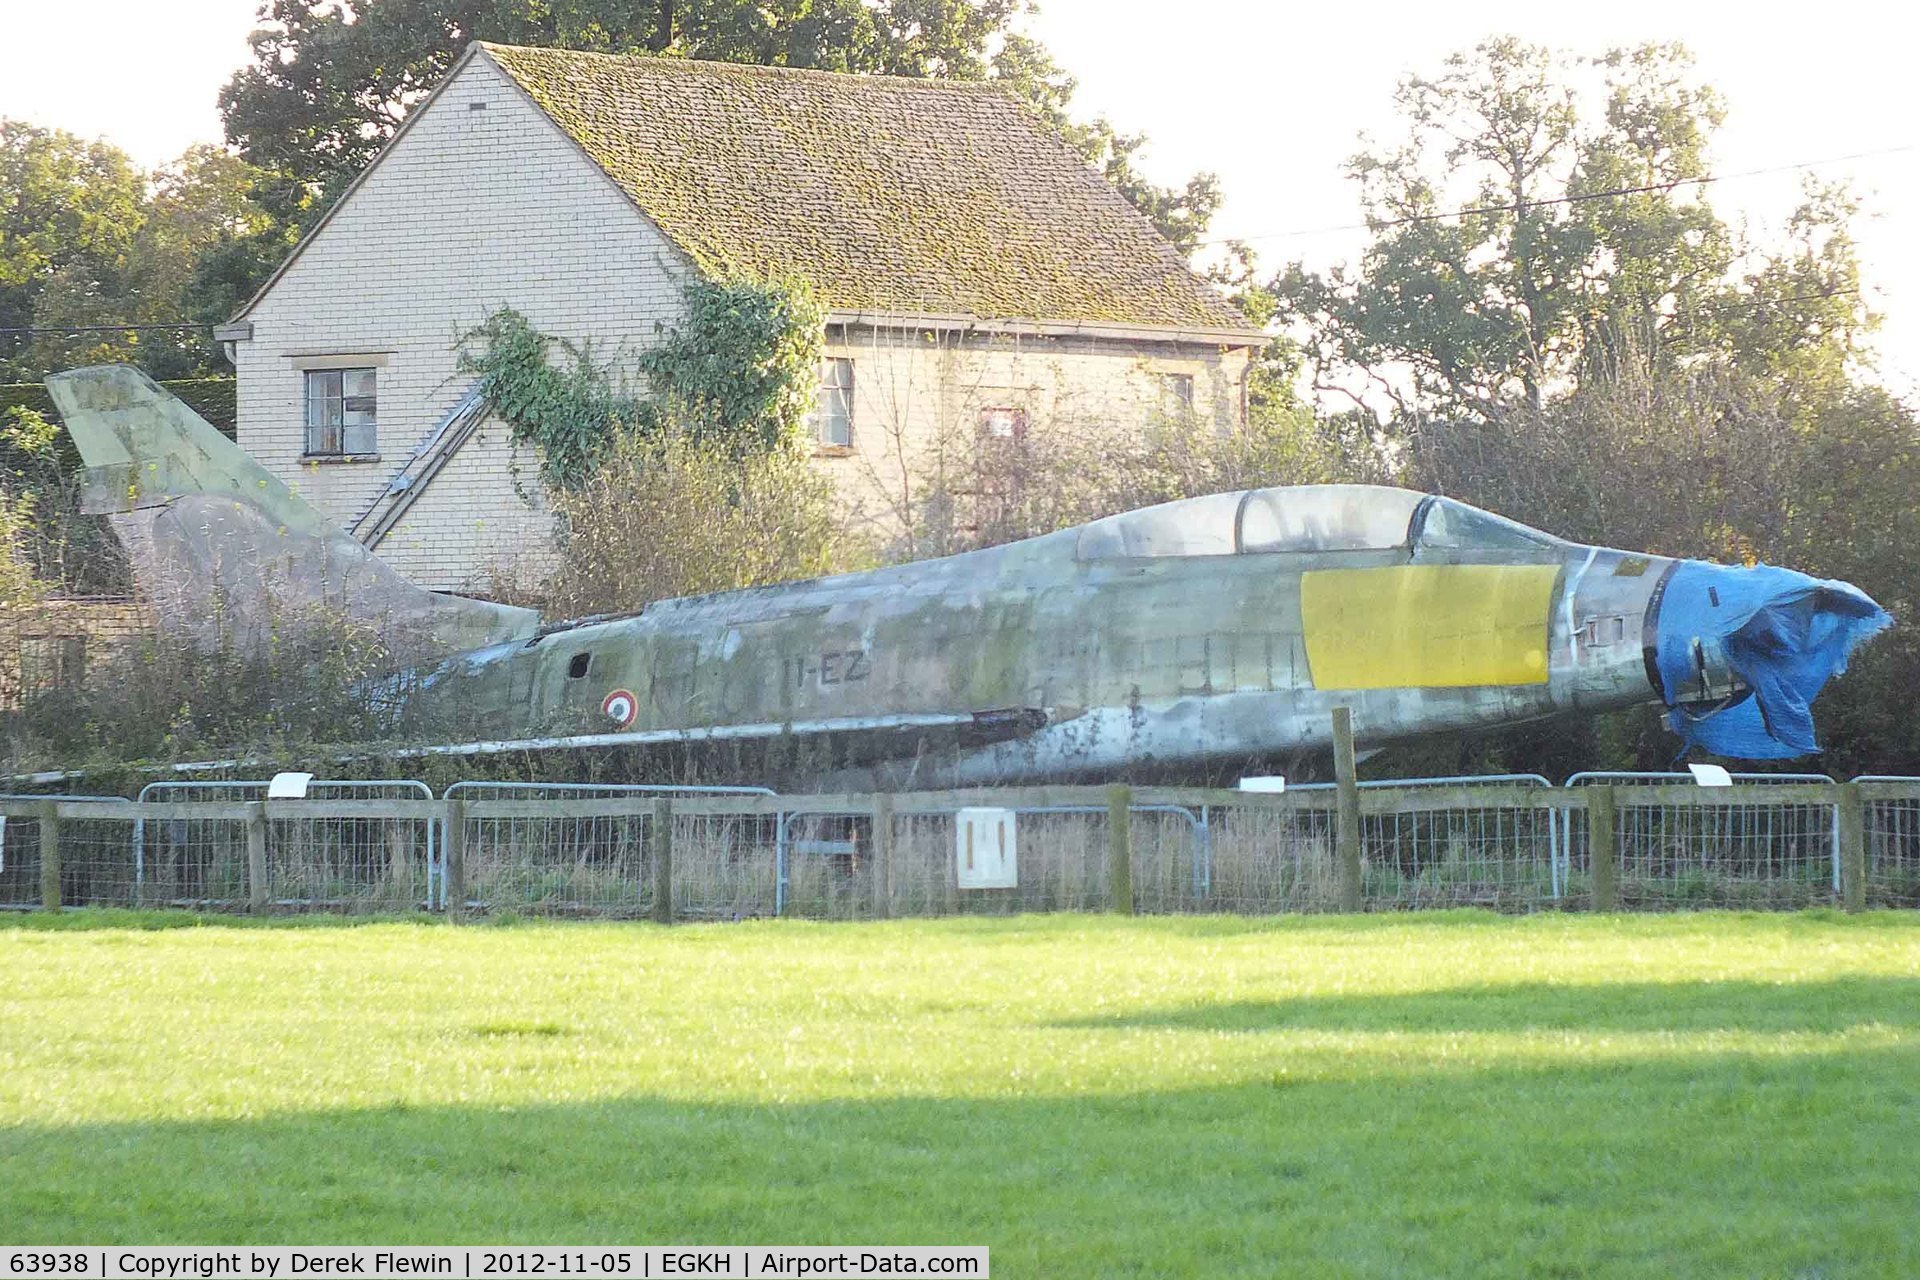 63938, 1956 North American F-100F Super Sabre C/N 243-214, Super Sabre, coded 11-EZ, previously 56-3938, seen at Headcorn, has been awaiting repatriation to the USA since 2007.